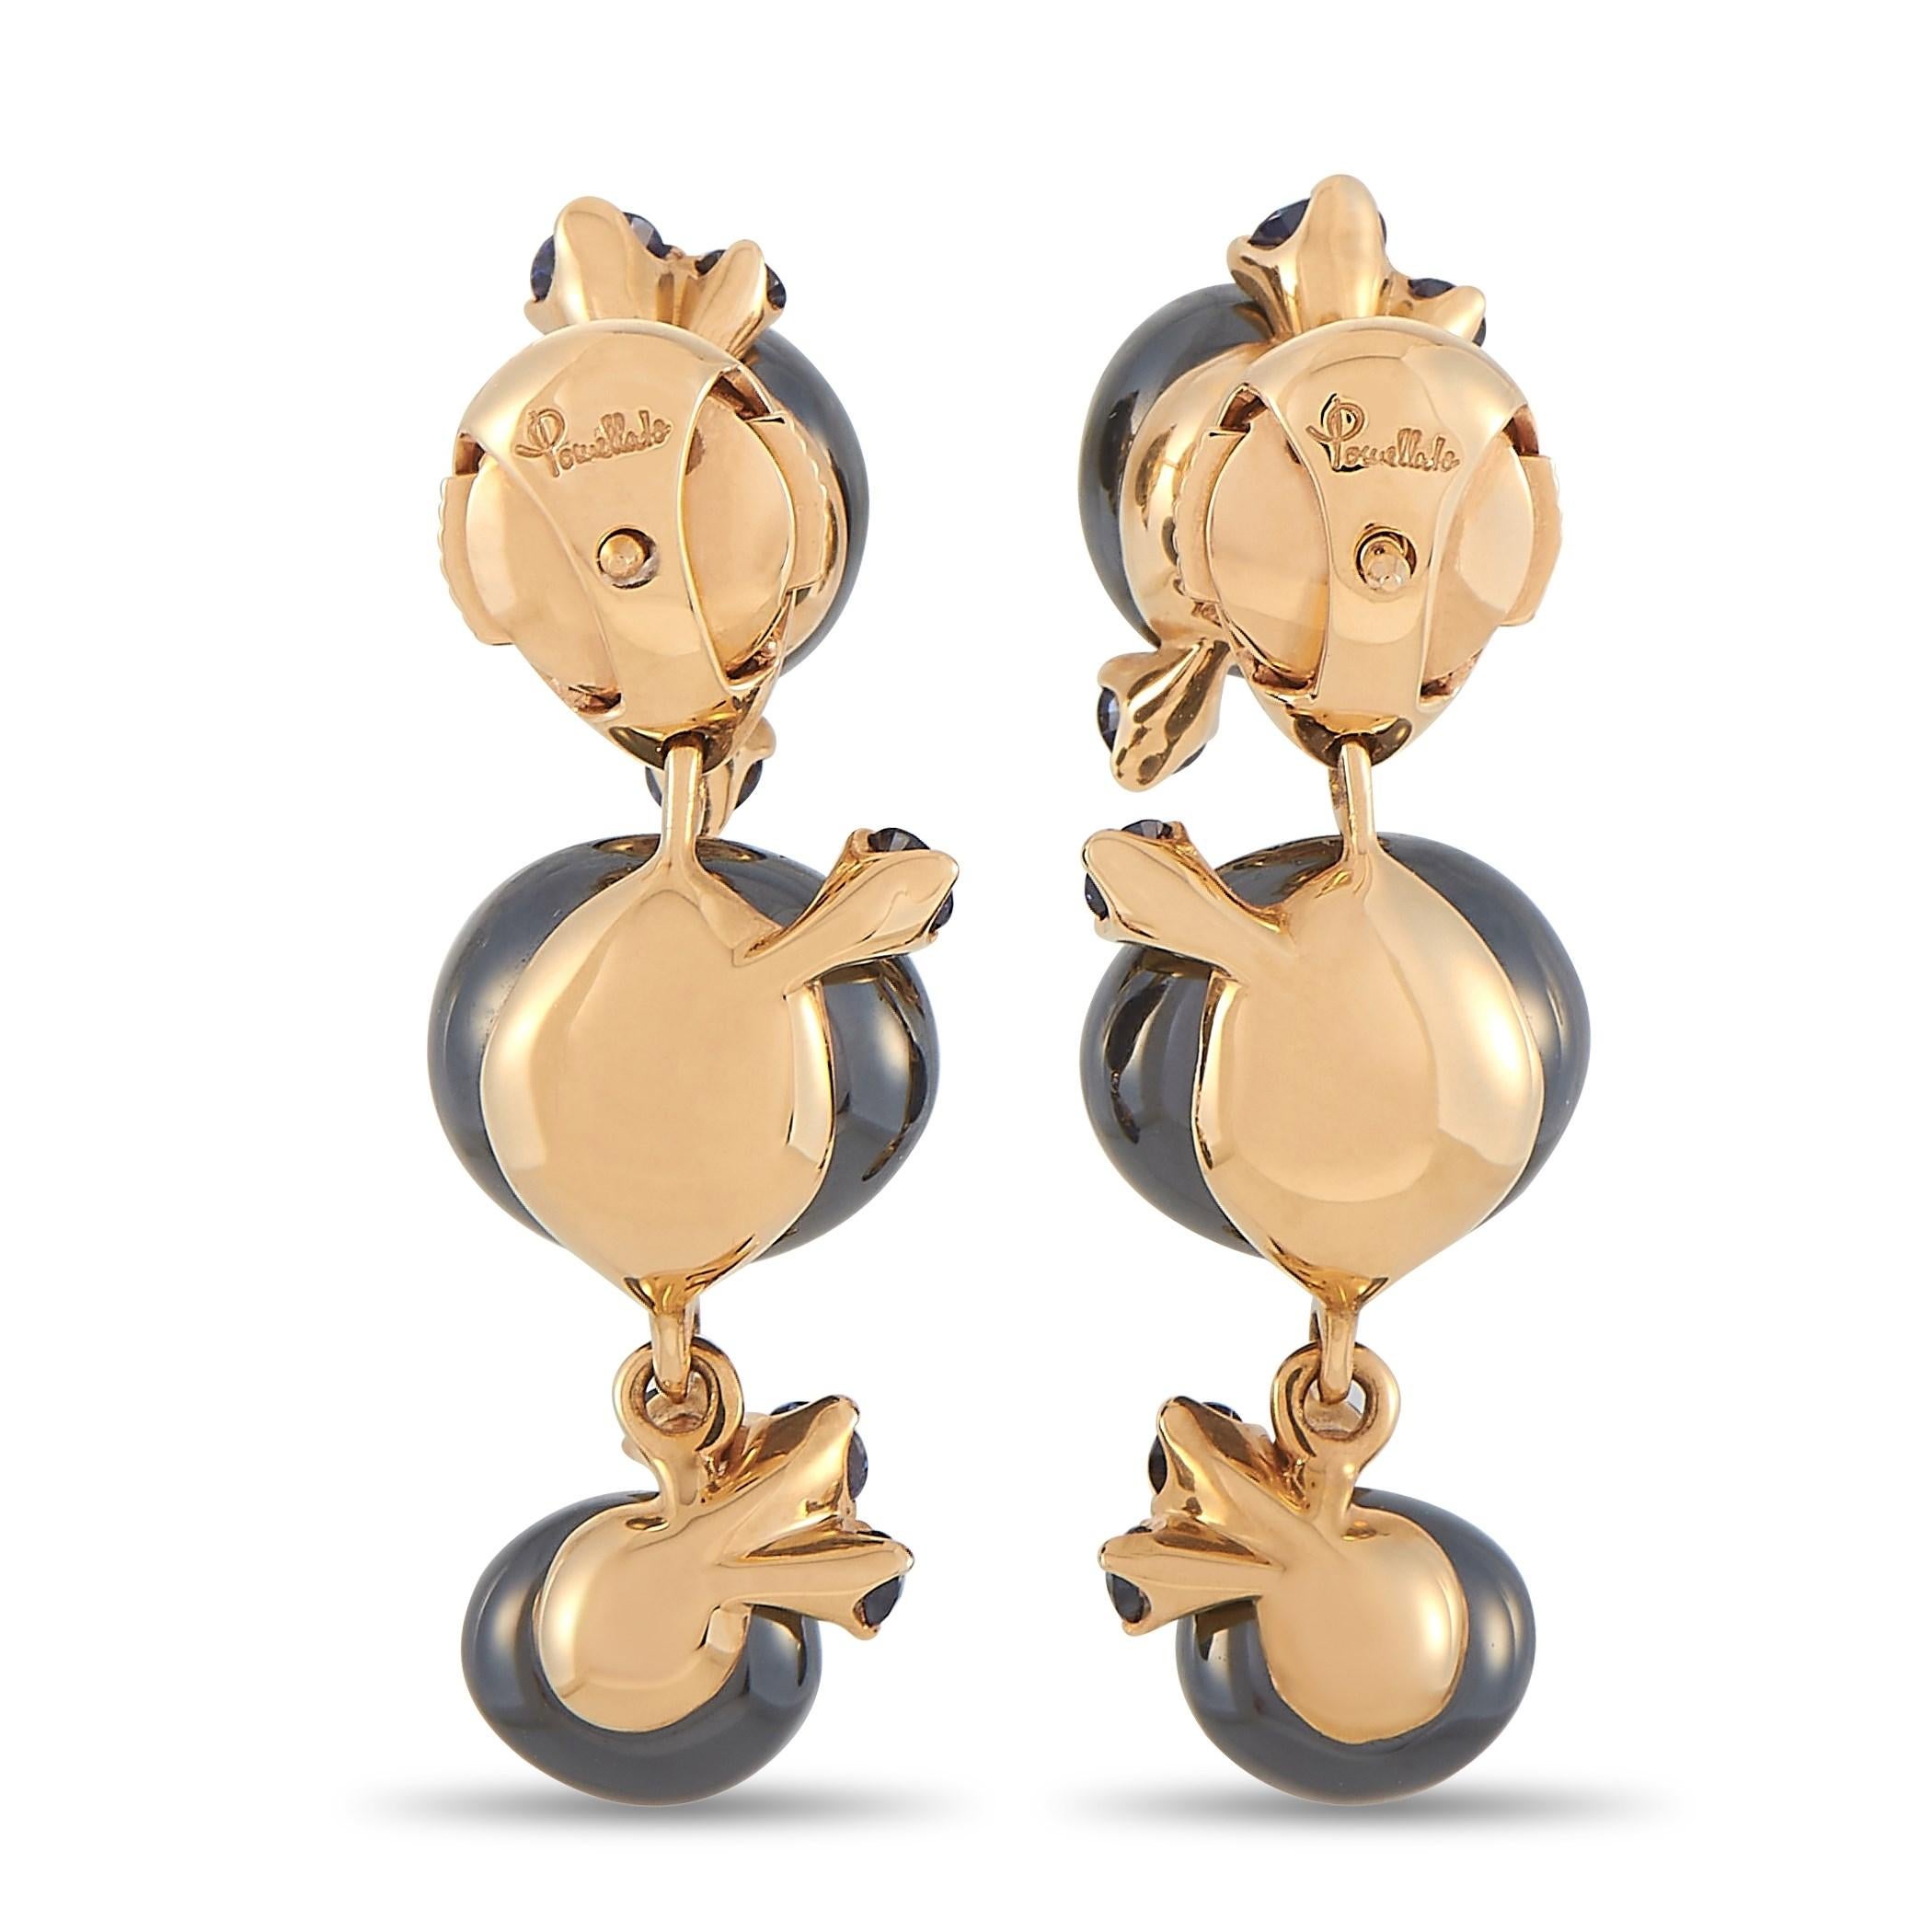 Perfect as a finishing touch to an elaborate ensemble or as a style-boosting contrast to a basic outfit, the Pomellato Capri Ceramic and Sapphire Drop Earrings will add pizzazz to your looks. This attractive ear jewel features a rose gold base